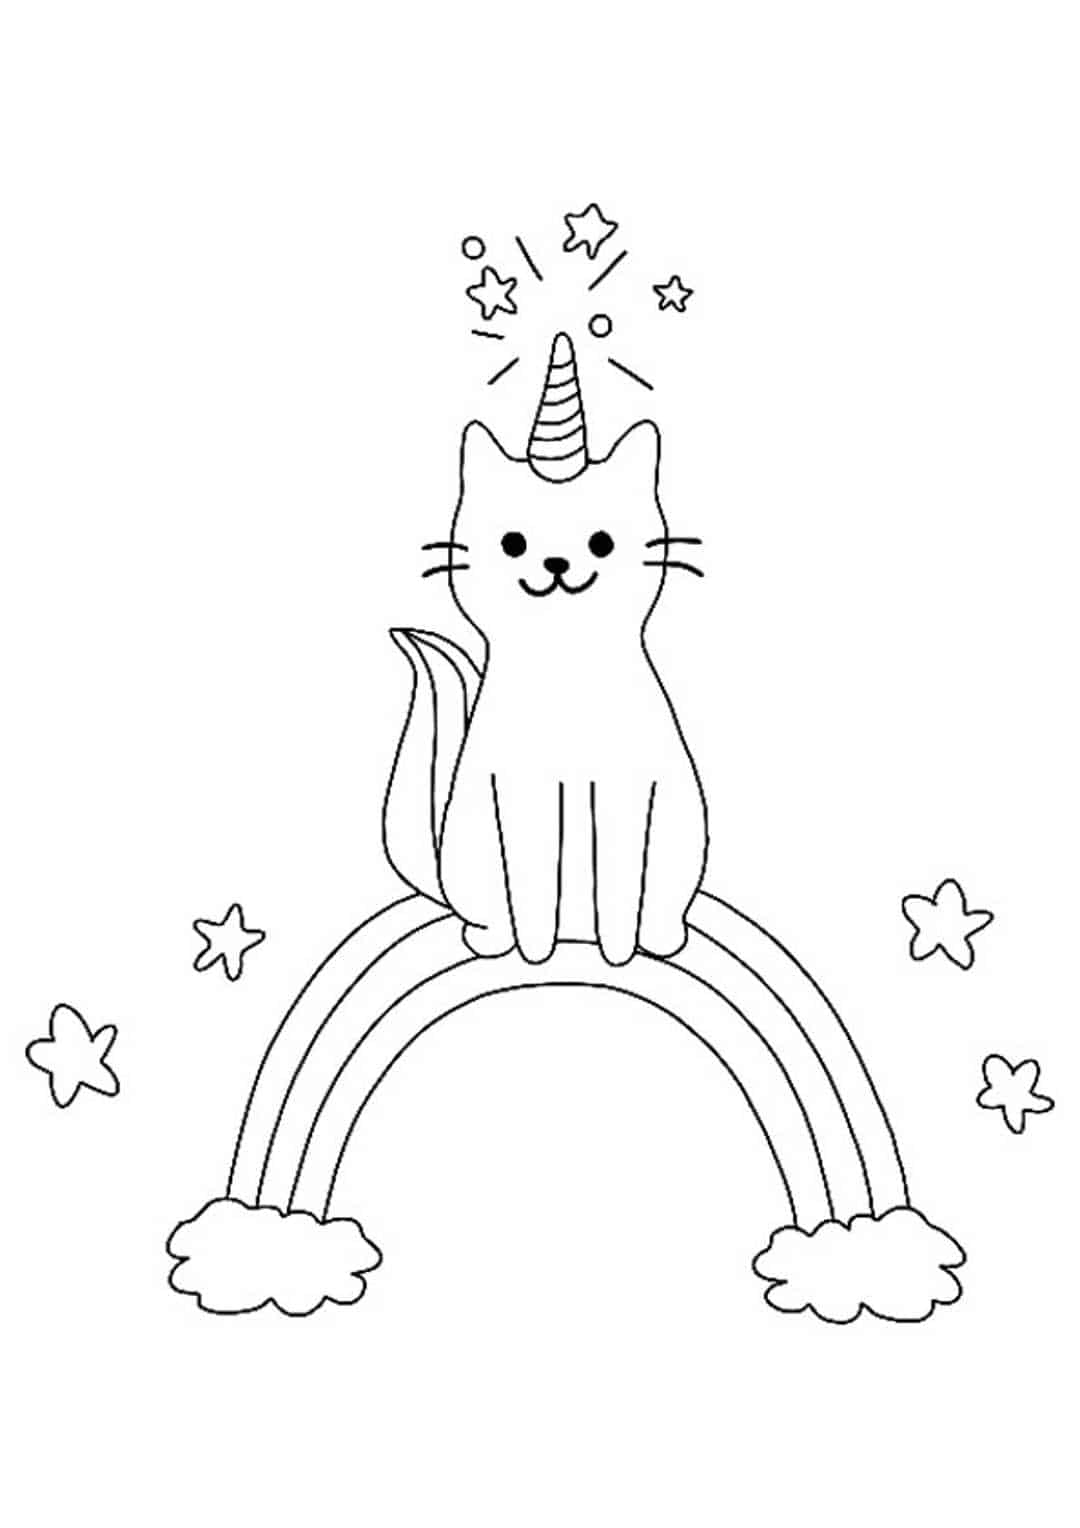 Cat Unicorn sits on the rainbow Coloring Pages